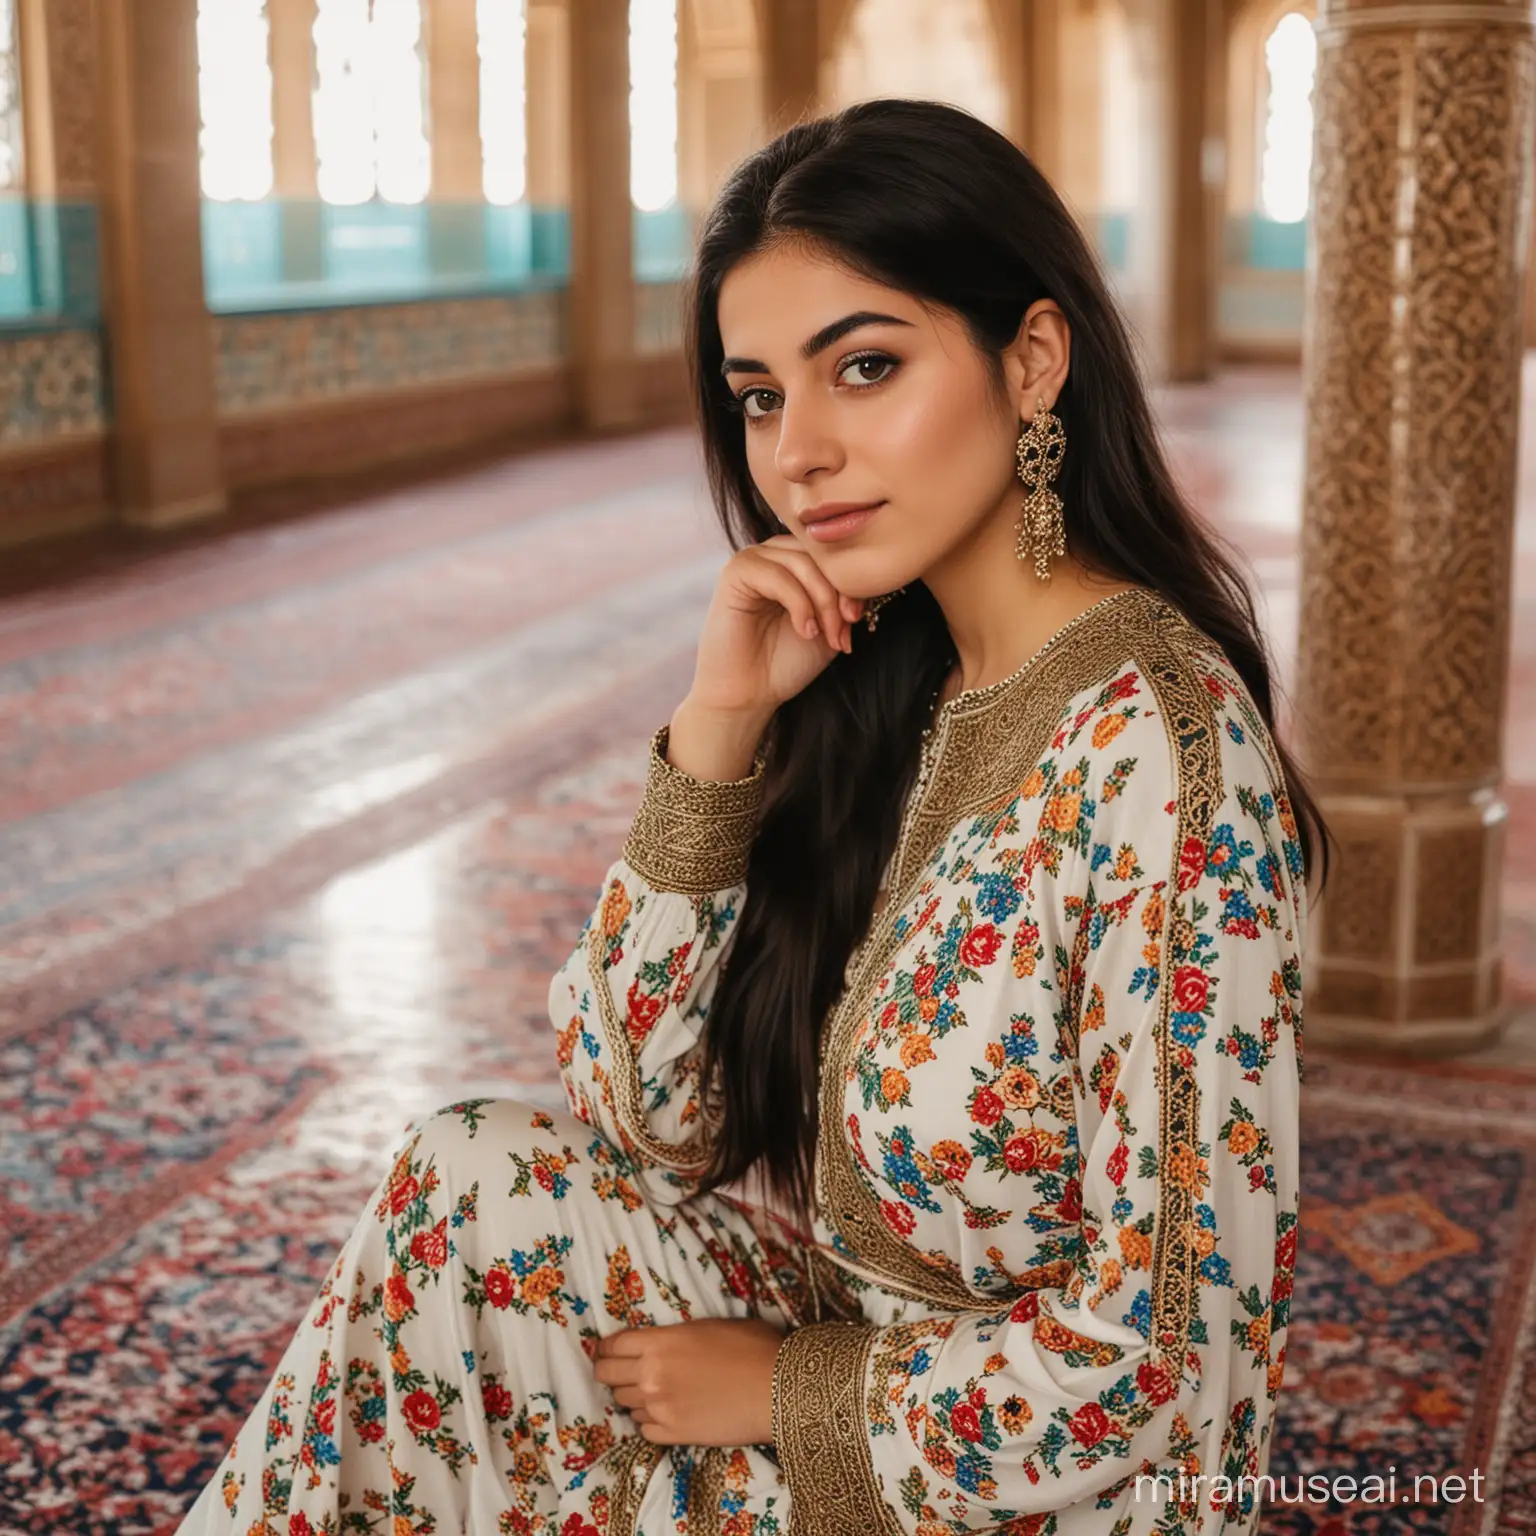 persian girl with persian dress in mosque